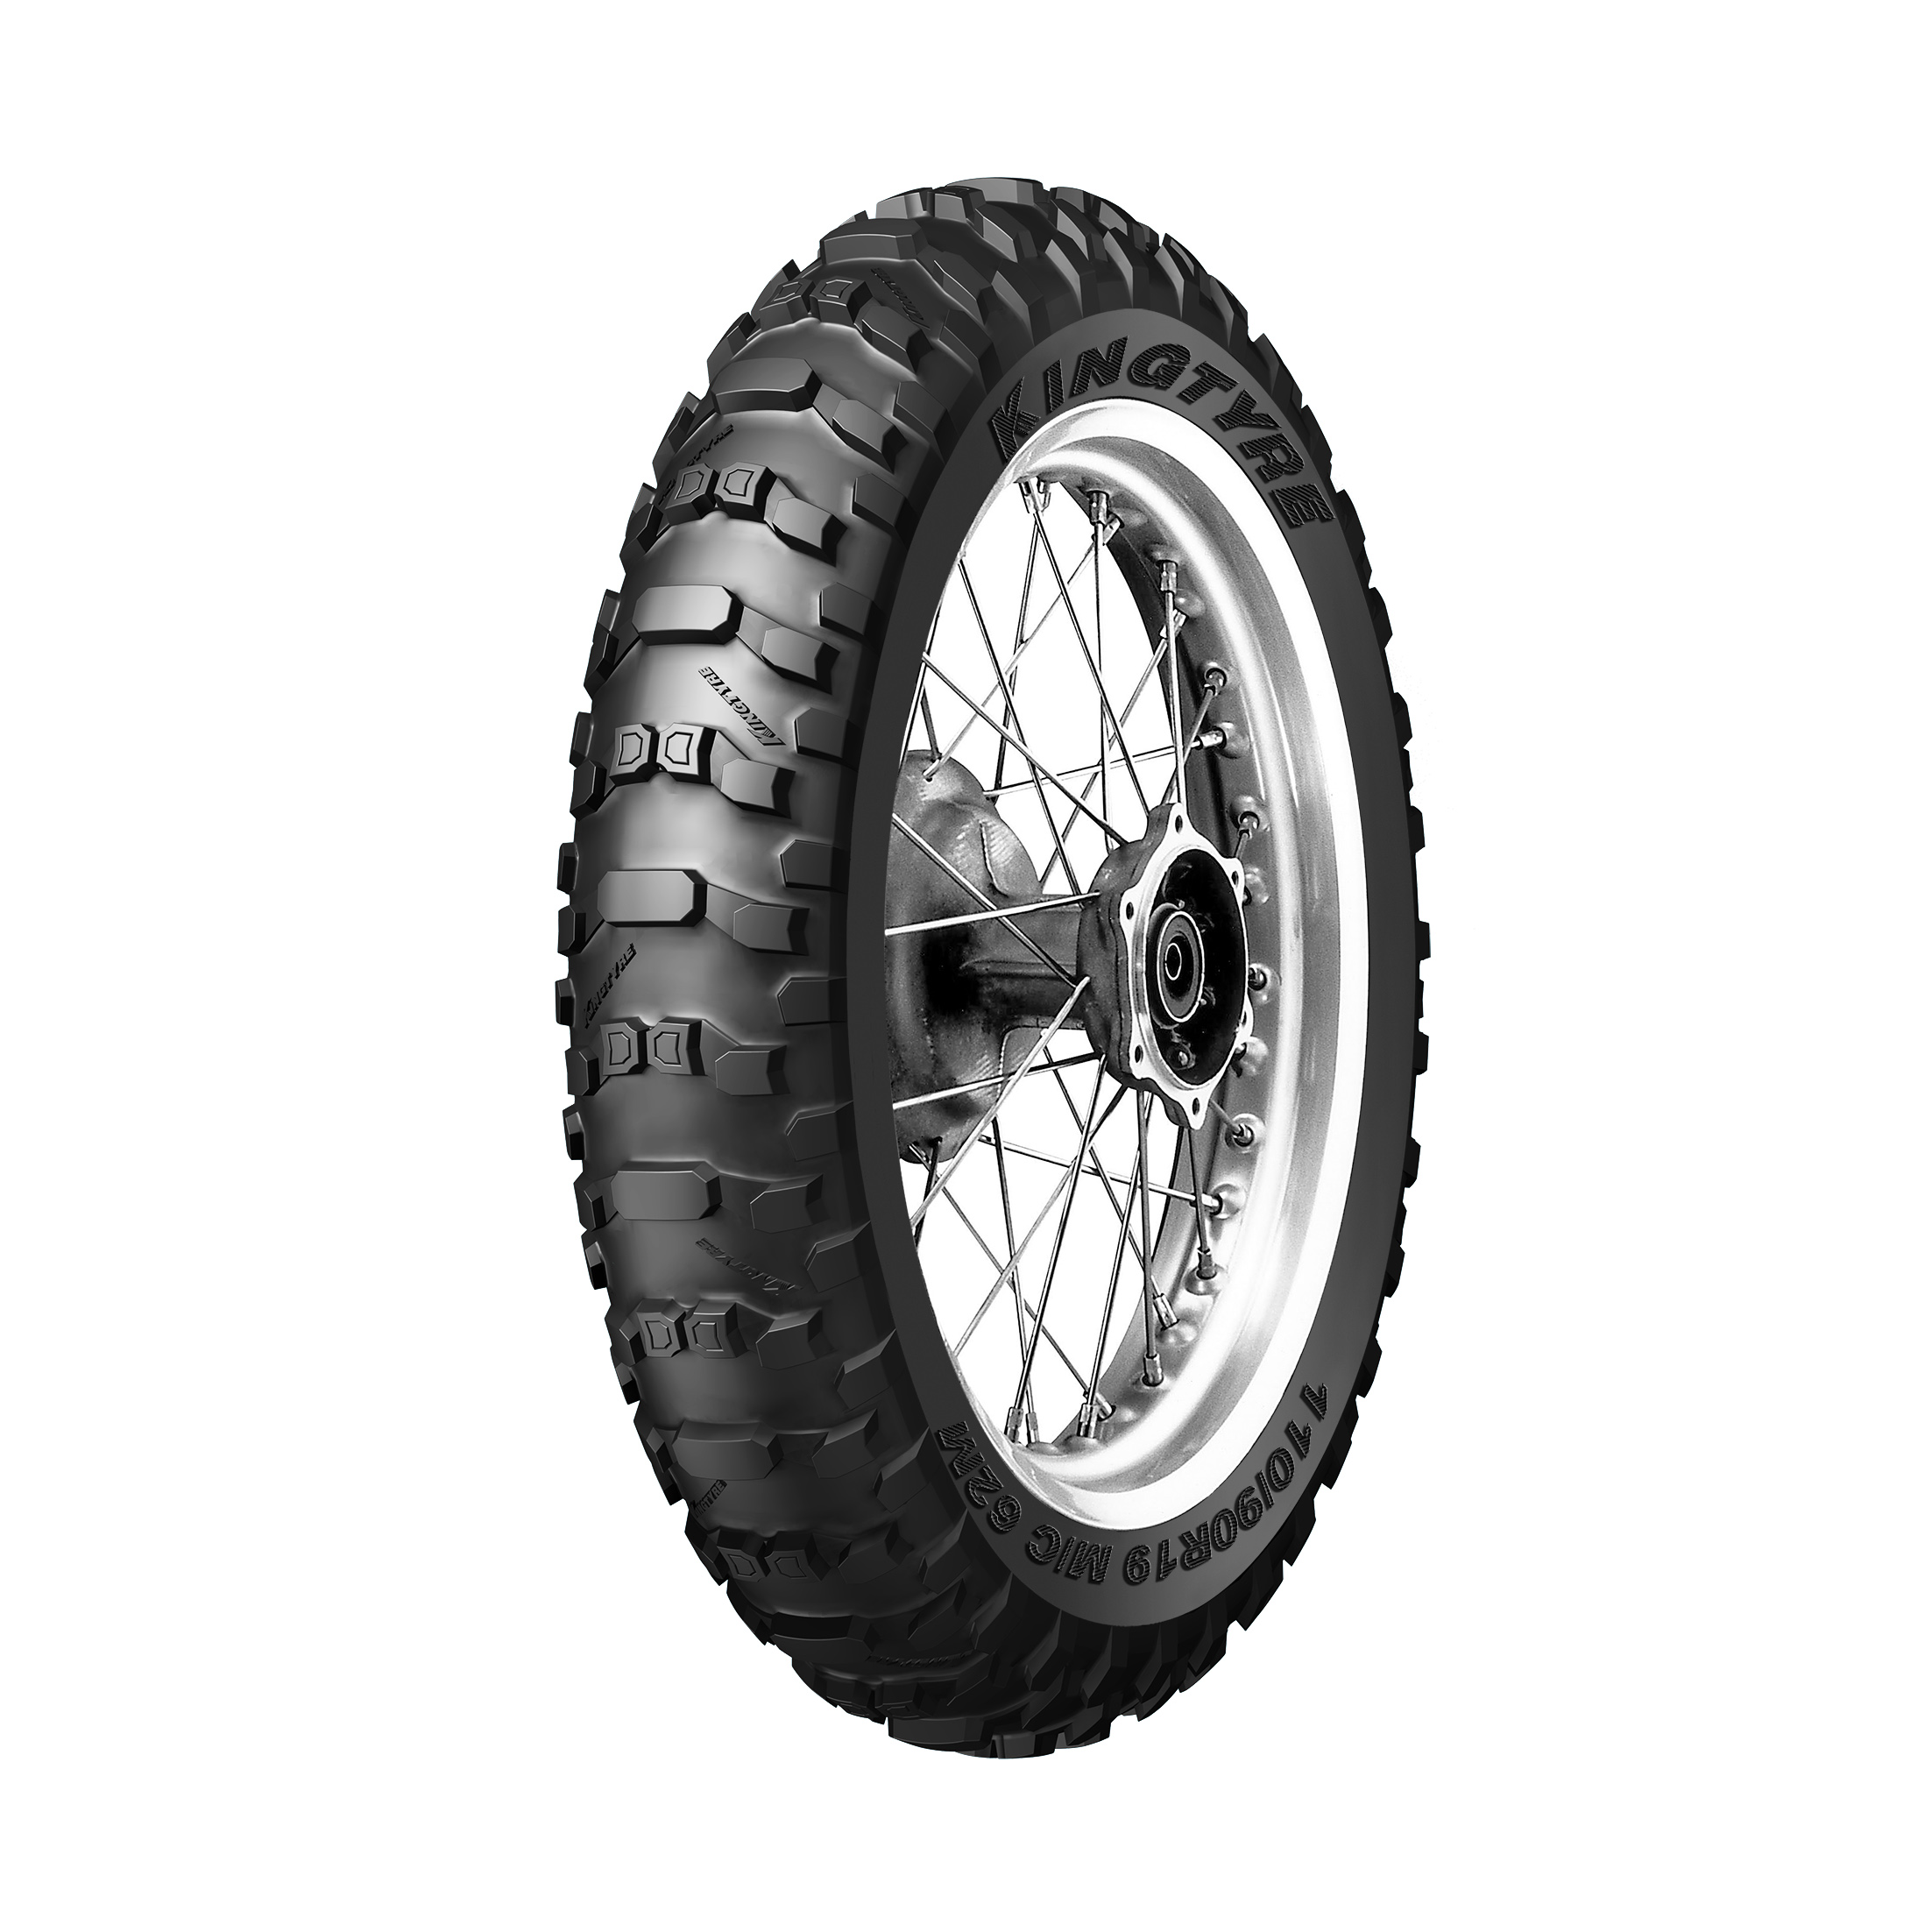 Newly Arrival 5.00-15 Motorcycle Tyre And Tube -
 MOTOCROSS OFF ROAD TIRE K83 – Willing